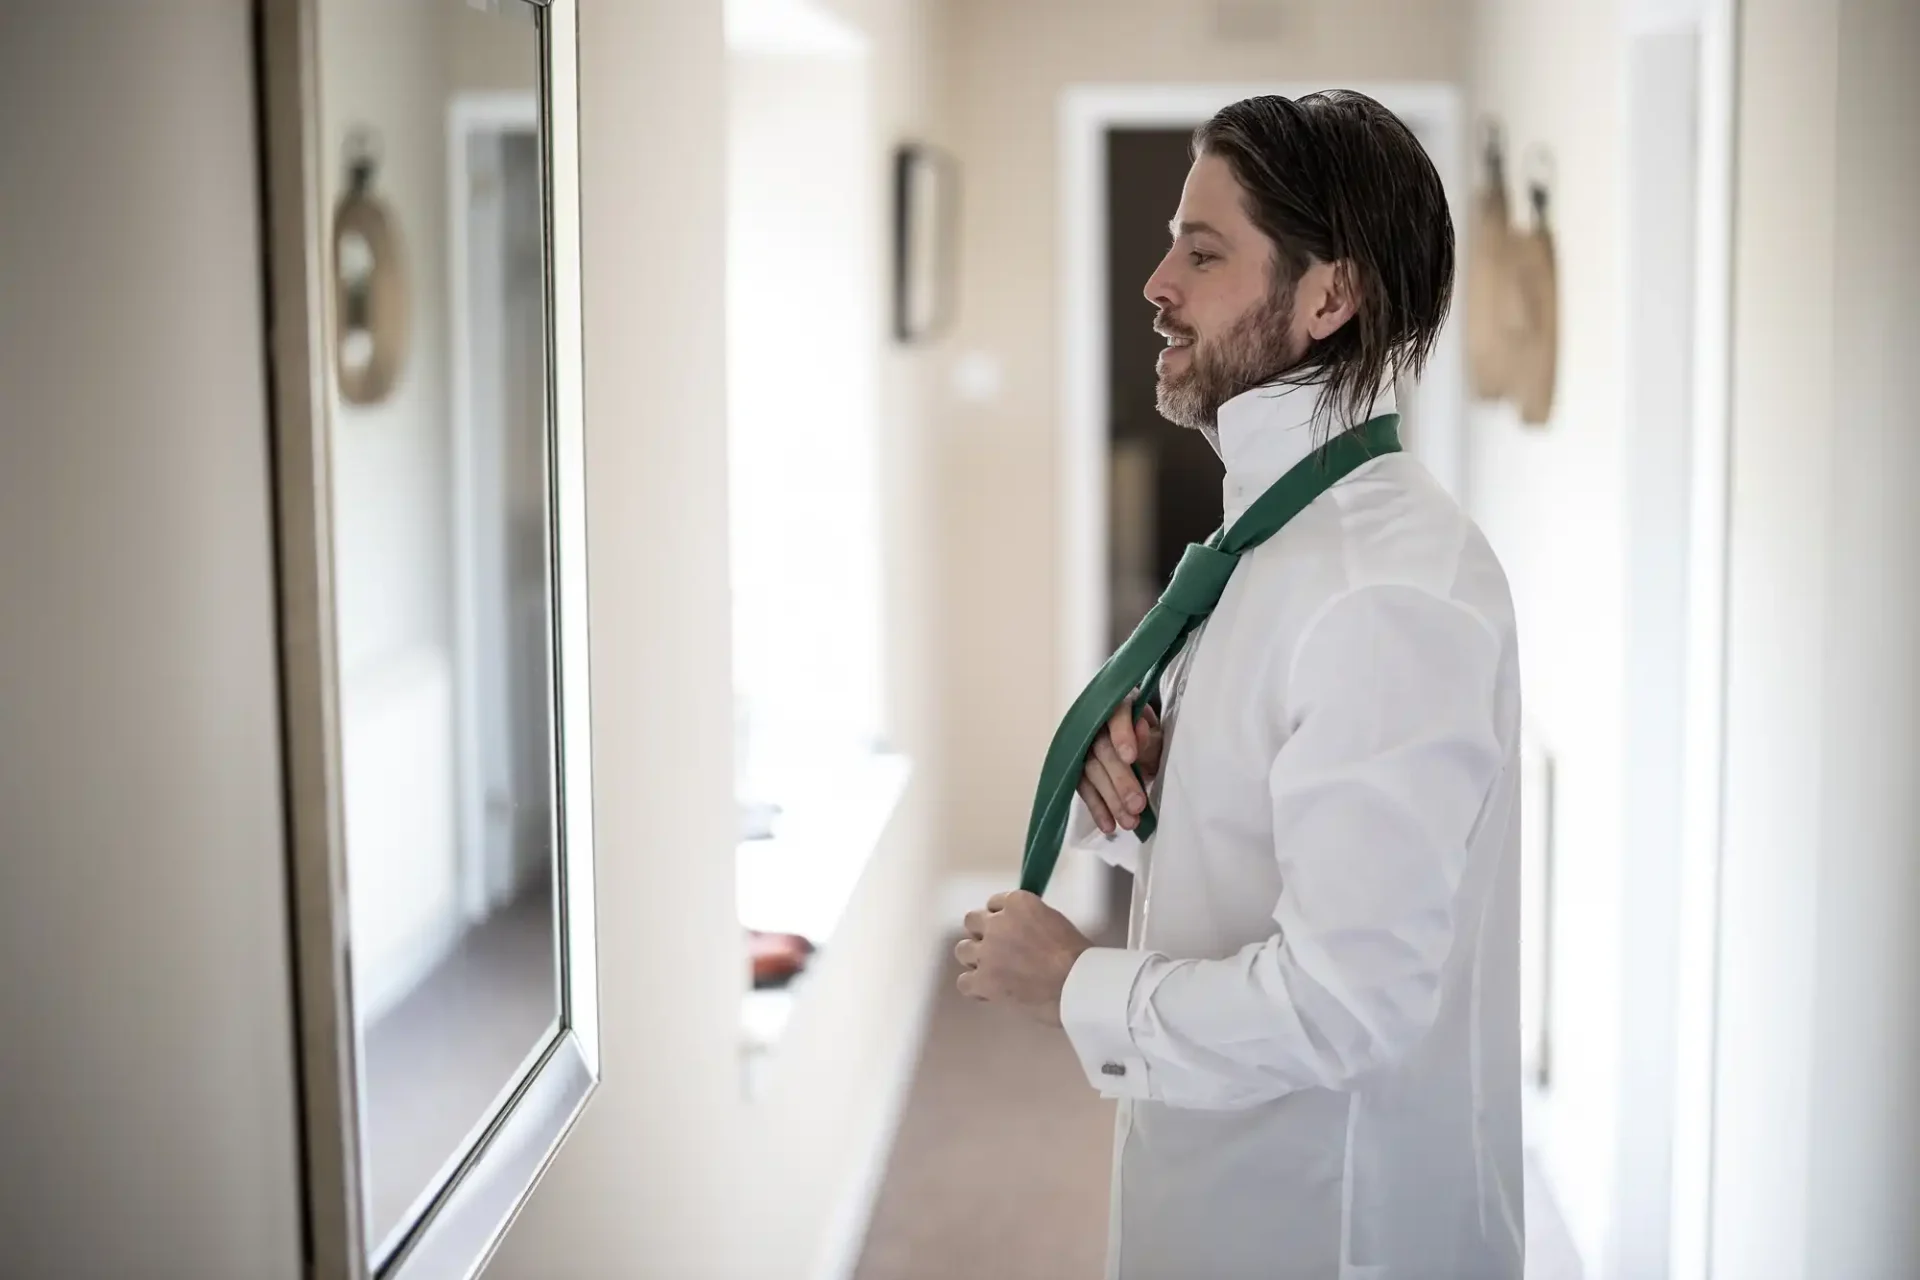 A man in a white shirt is tying a green tie while looking into a mirror in a hallway.